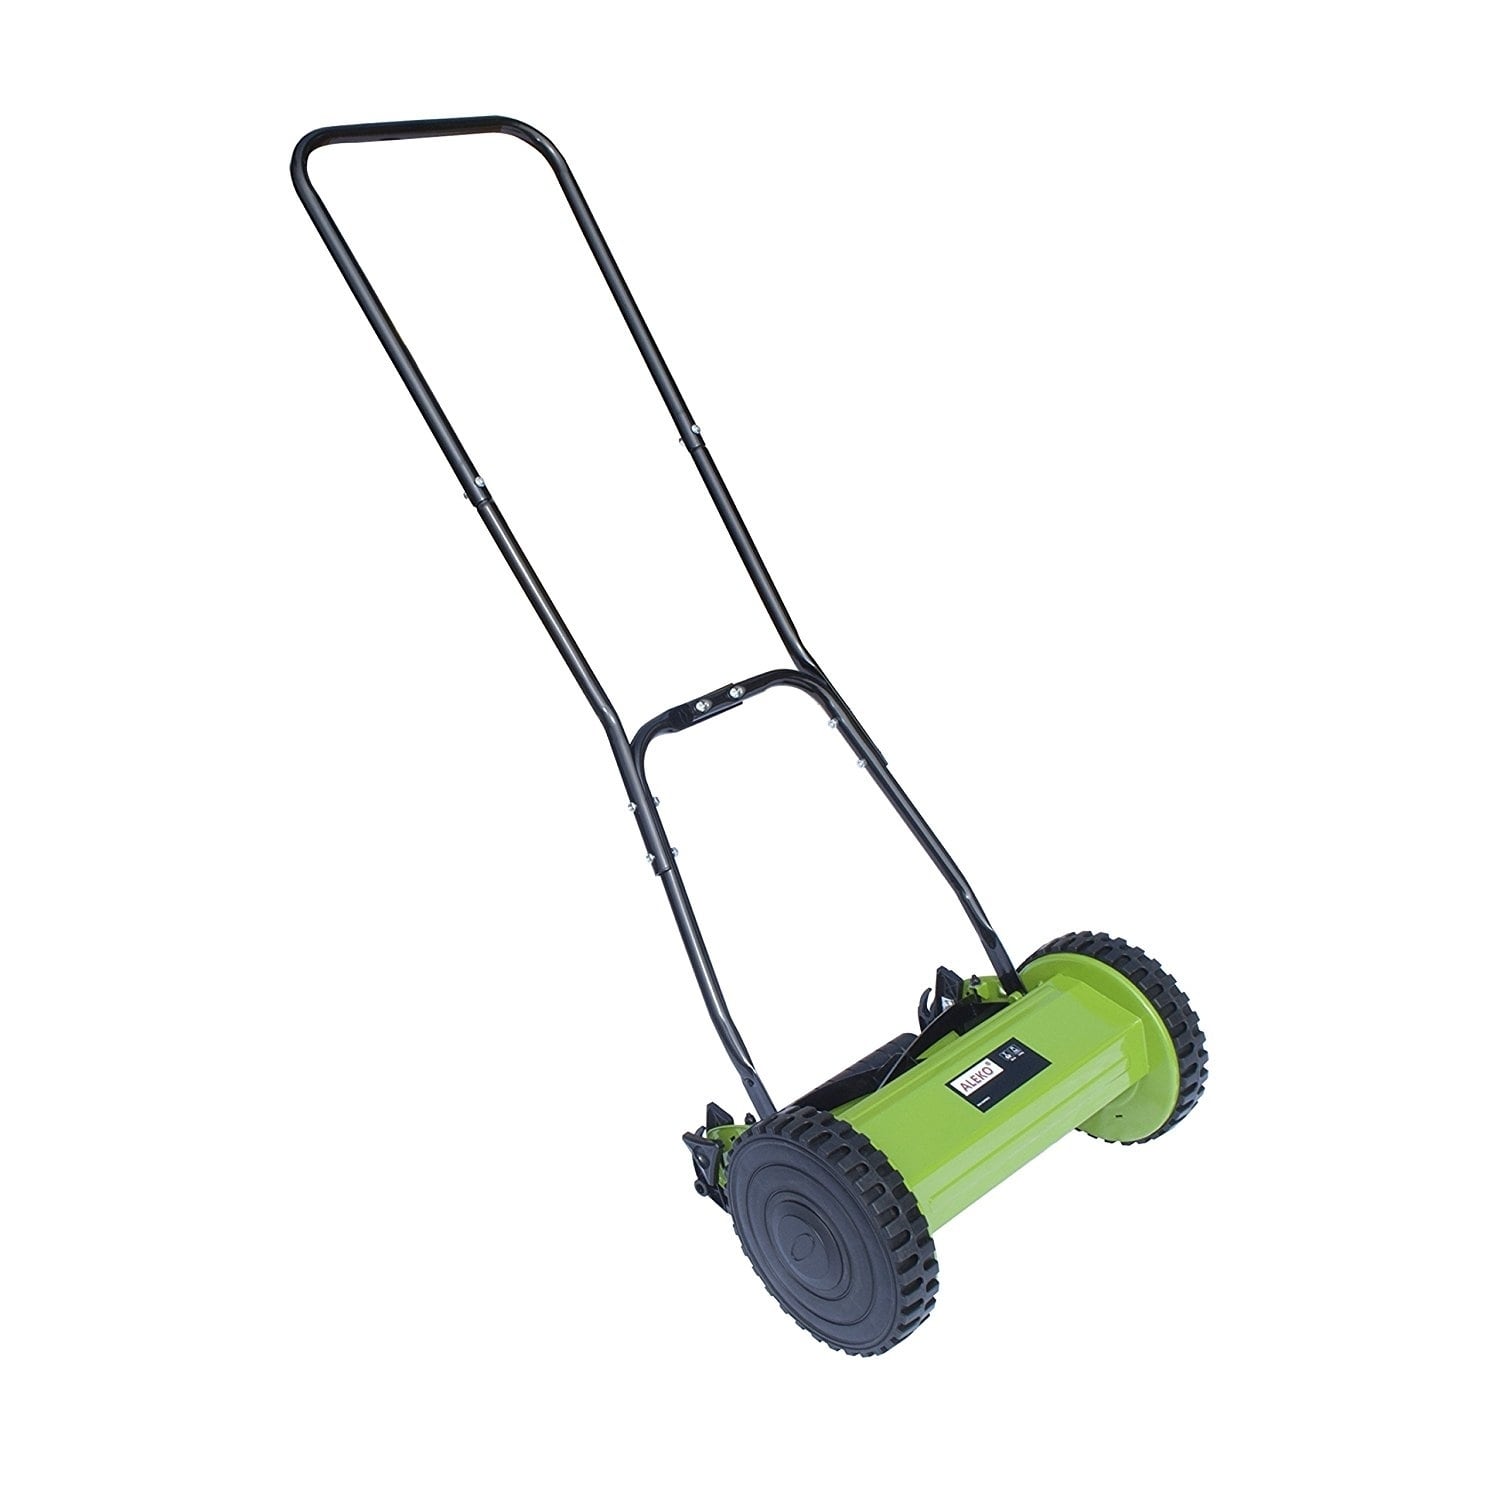 ALEKO Hand Push Lawn Mower with Adjustable Cutting Height - 5-Blade - 12-Inch - image 3 of 5